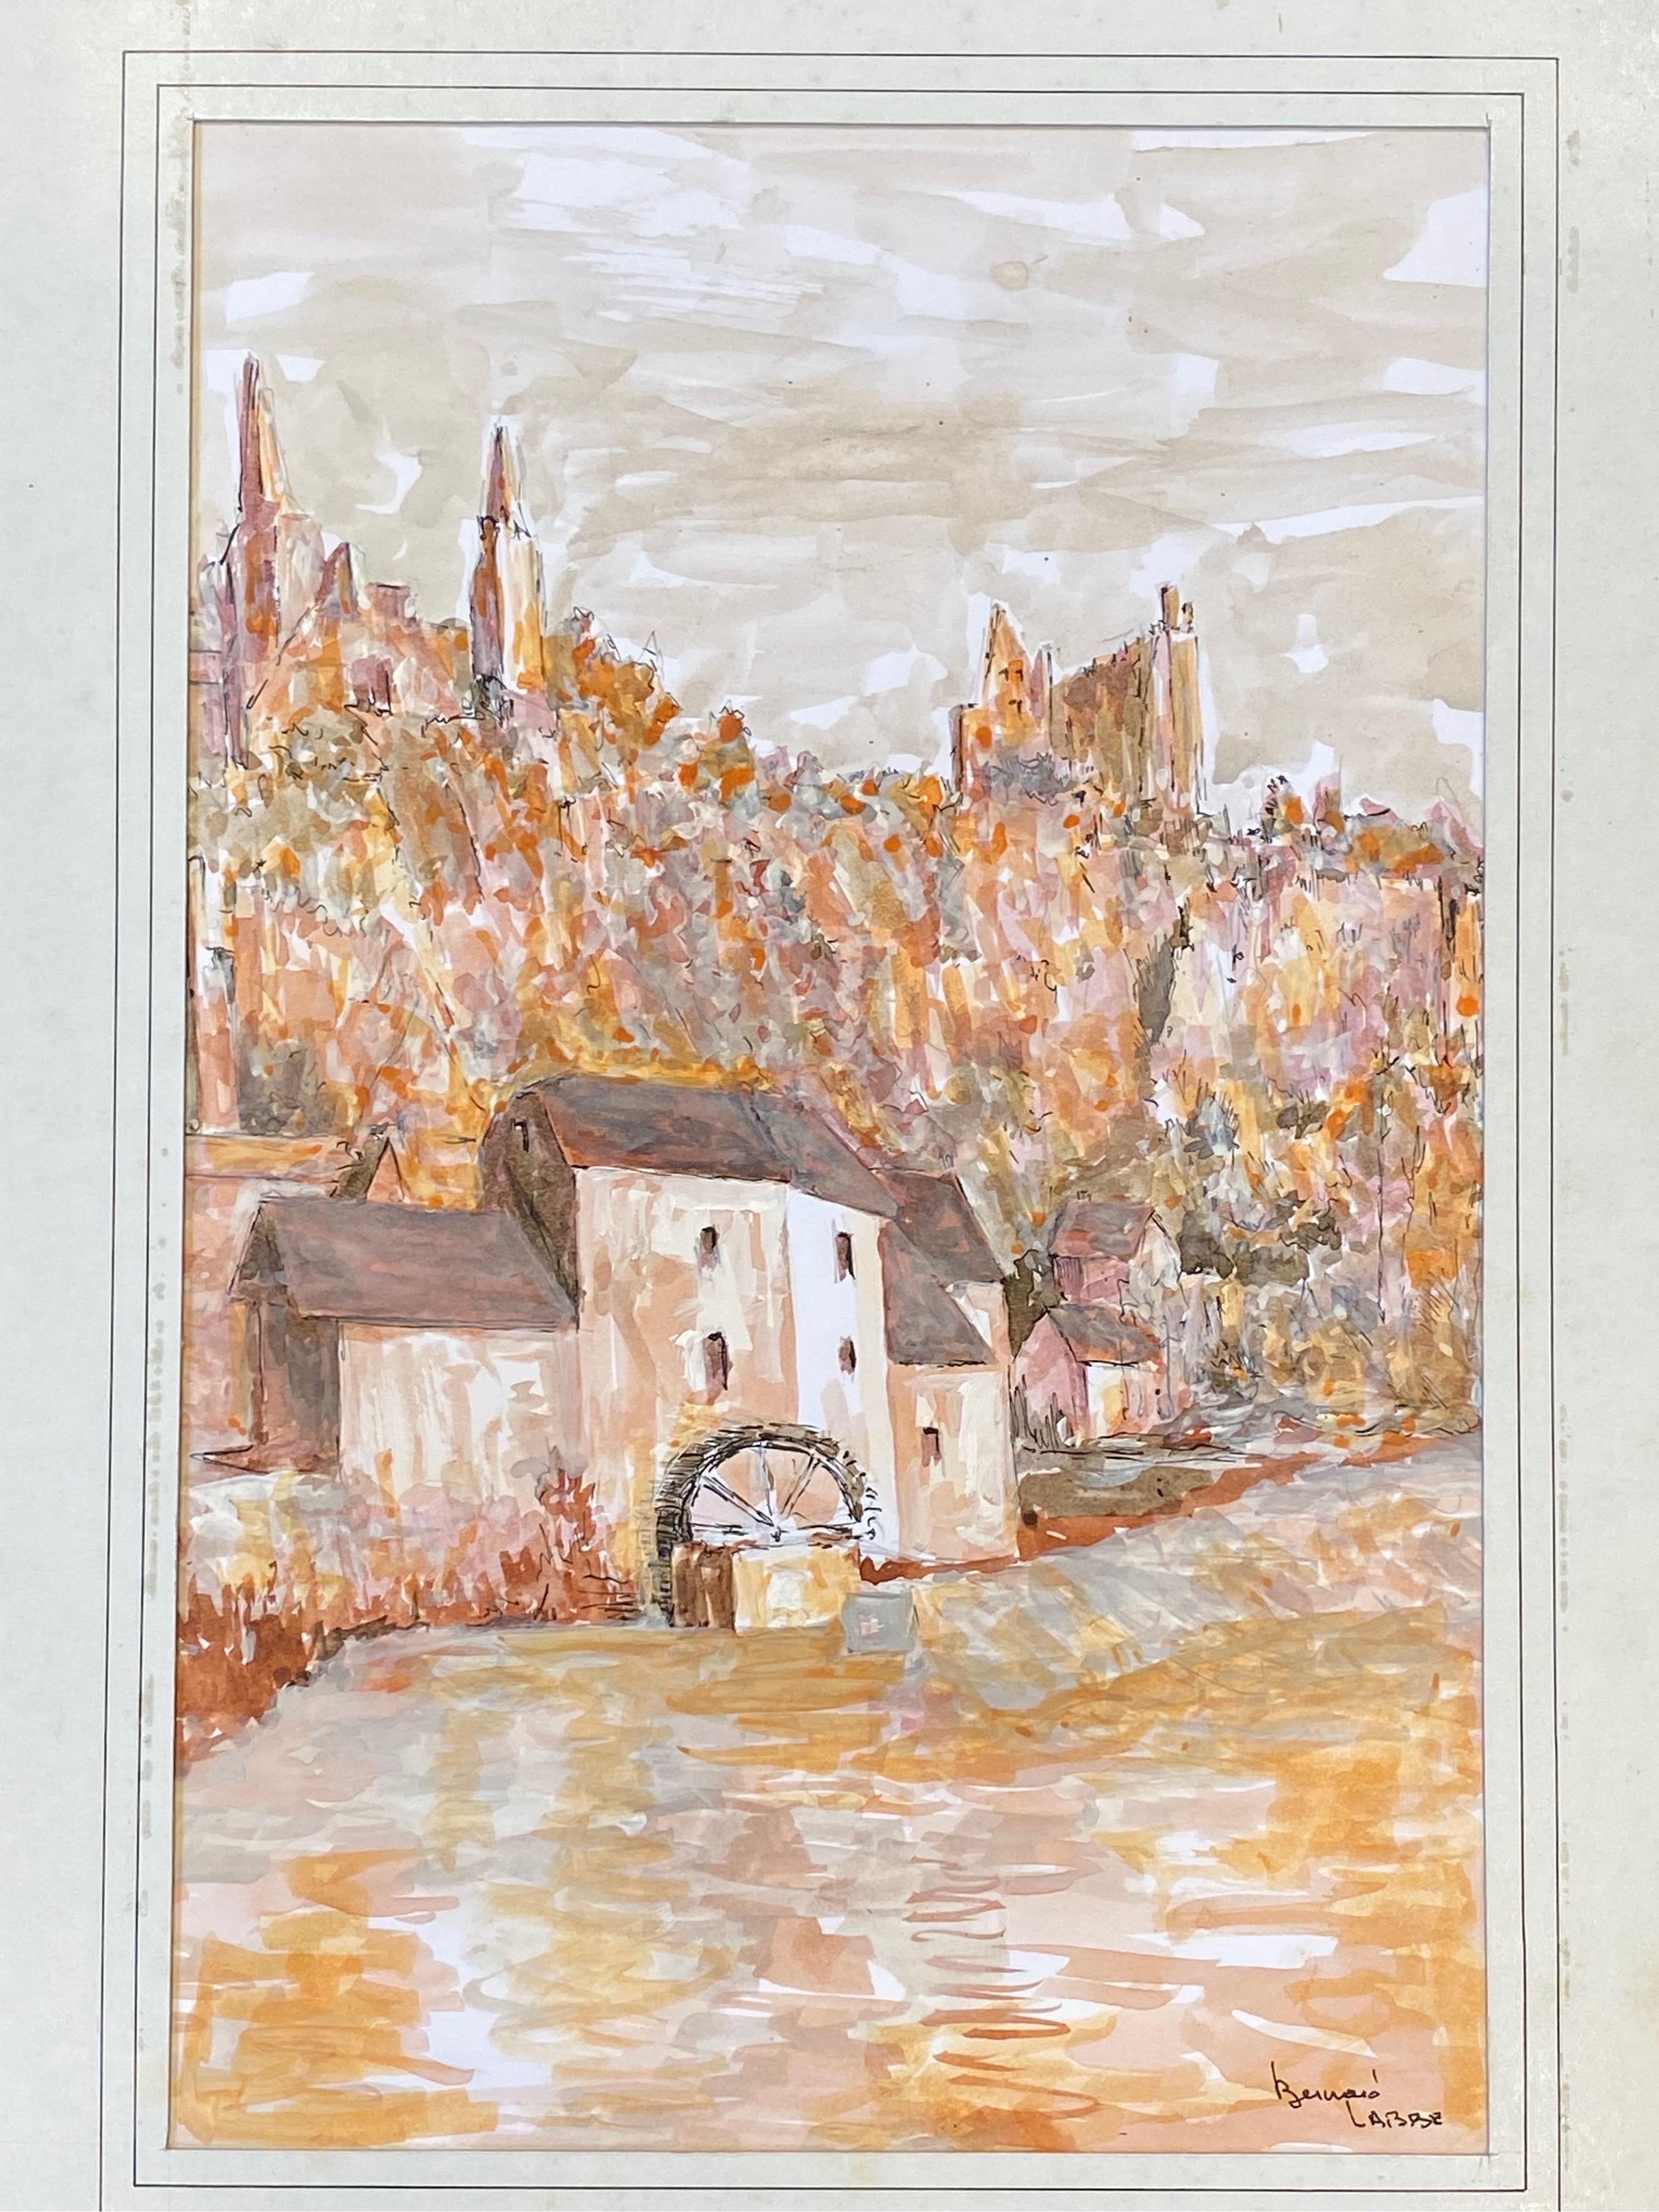 French Landscape
by Bernard Labbe (French mid-20th century)
Signed original watercolour/ gouache painting on artist paper , mounted on card, unframed
Size: 15.75 x 12 inches
Condition: very good and ready to be enjoyed. 

Provenance: the